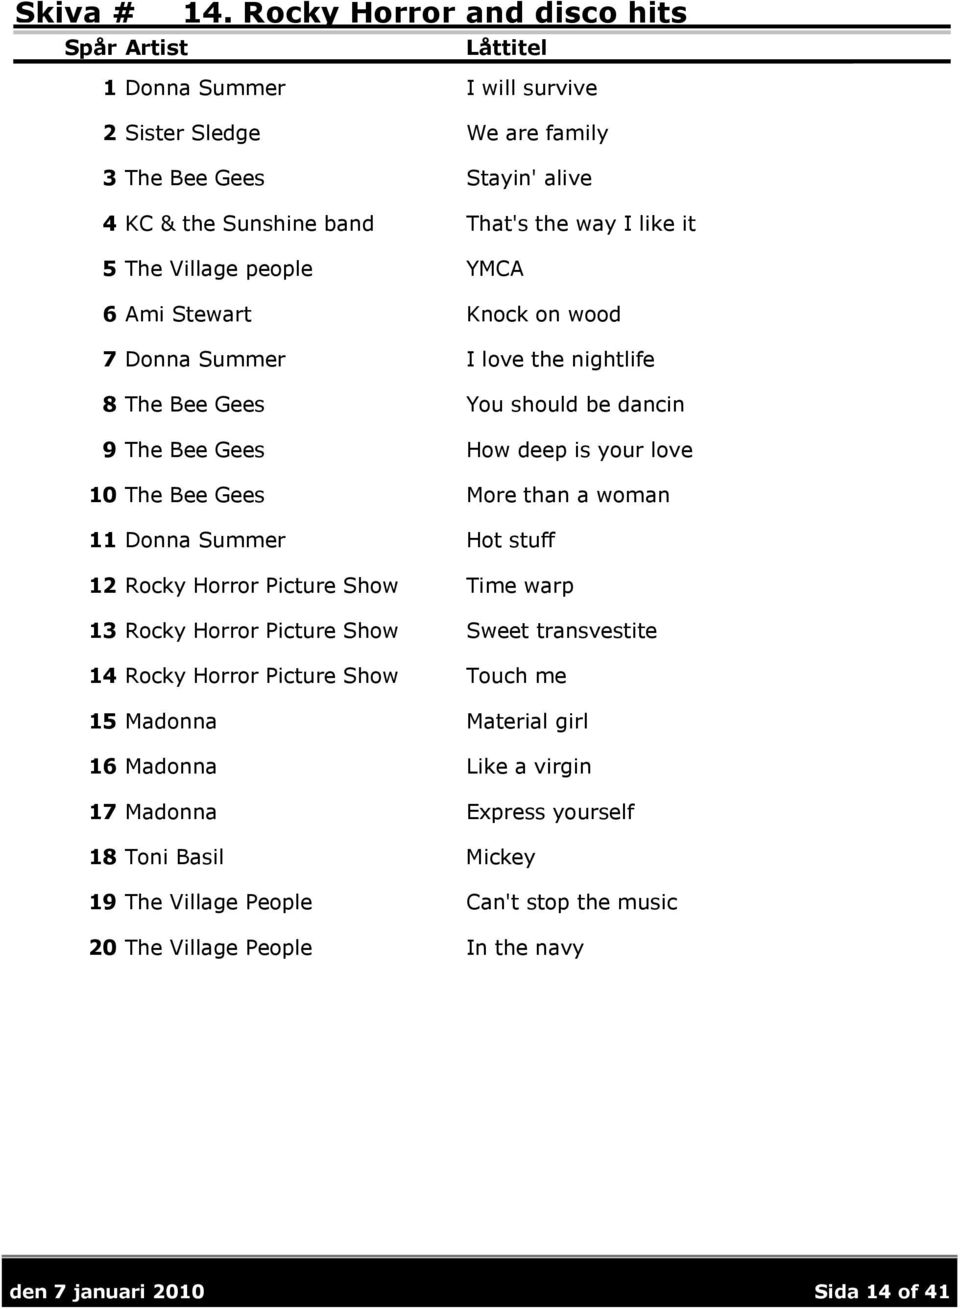 people YMCA 6 Ami Stewart Knock on wood 7 Donna Summer I love the nightlife 8 The Bee Gees You should be dancin 9 The Bee Gees How deep is your love 10 The Bee Gees More than a woman